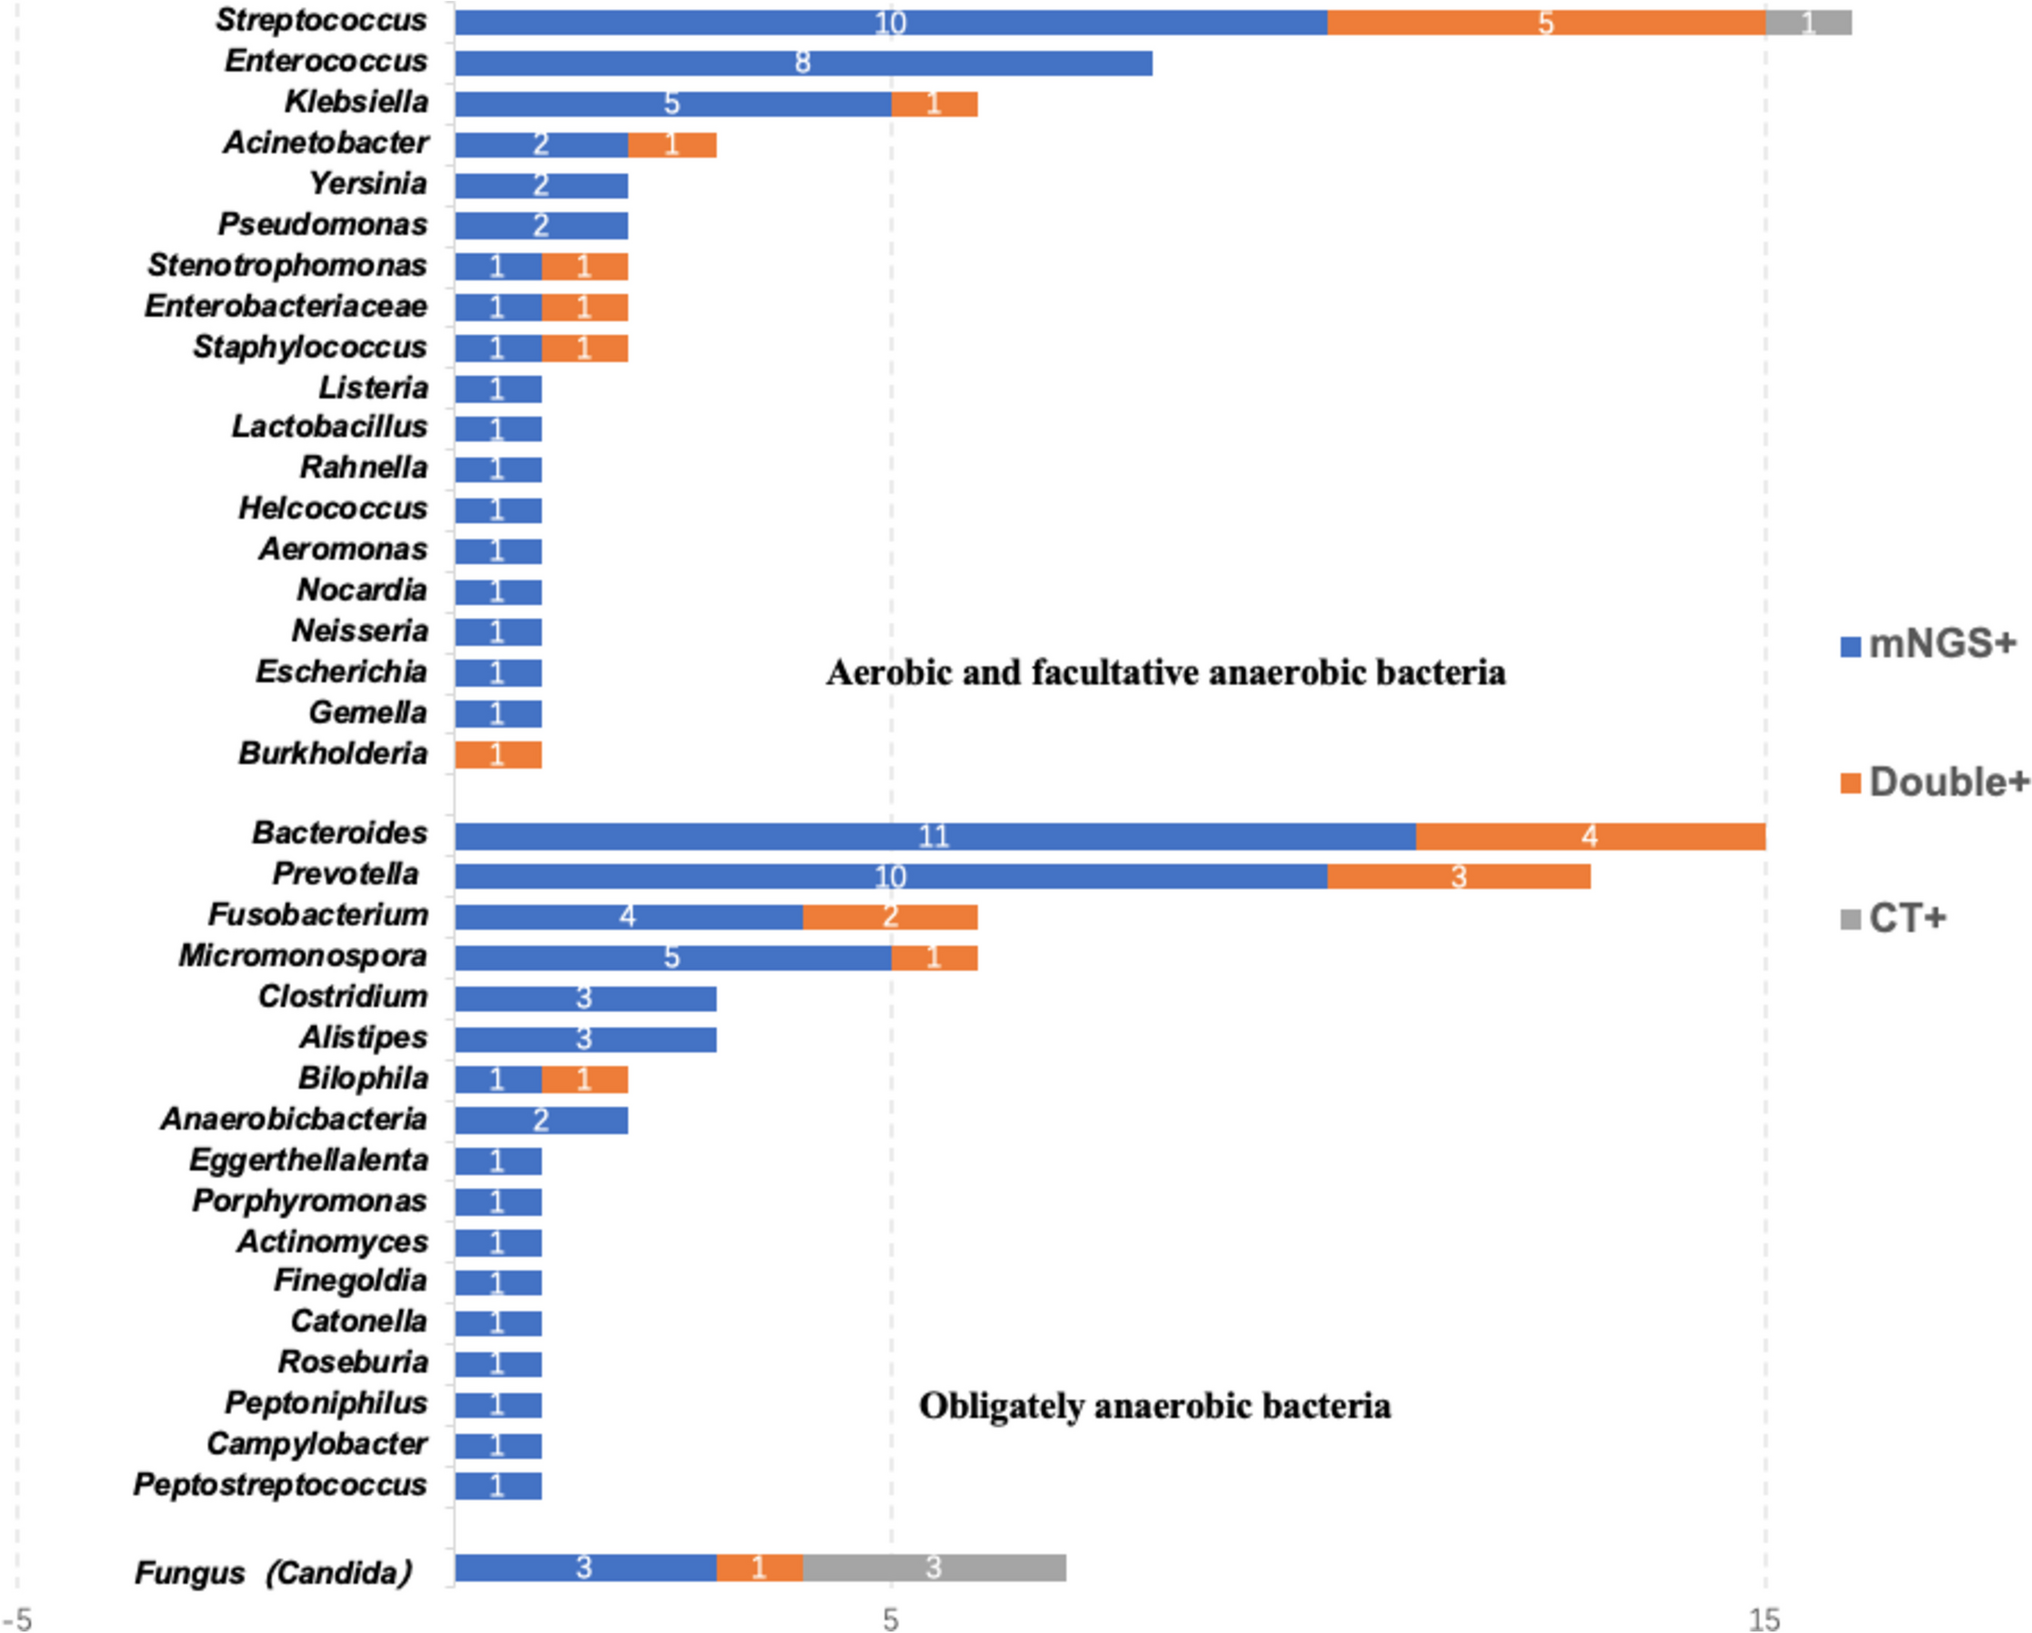 Use of pus metagenomic next-generation sequencing for efficient identification of pathogens in patients with sepsis